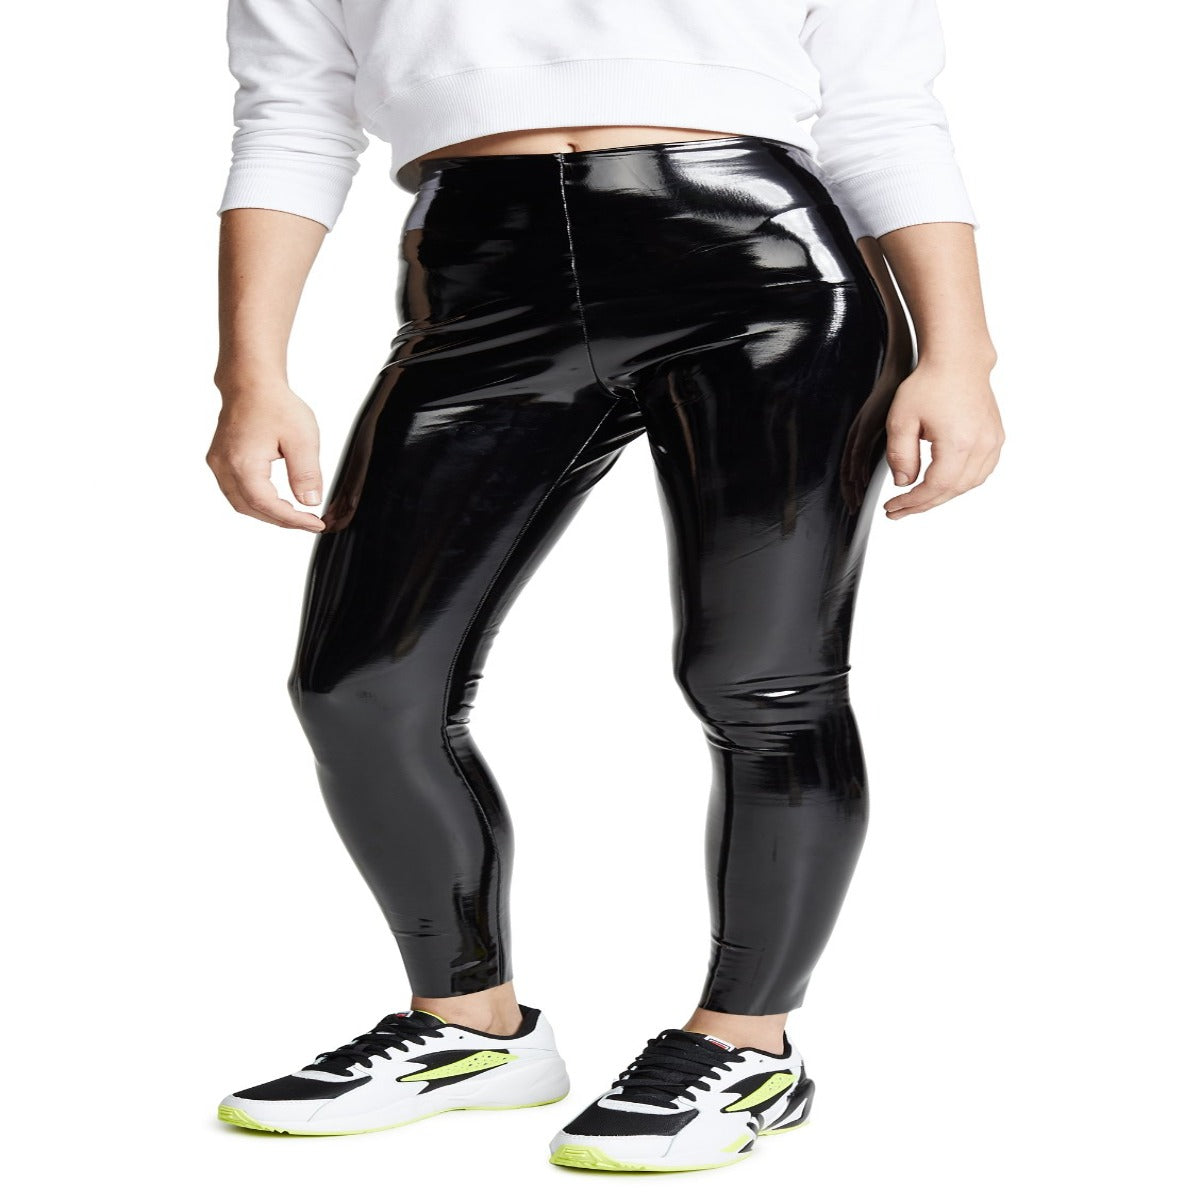 Vinyl Leggings Outfit Outfit